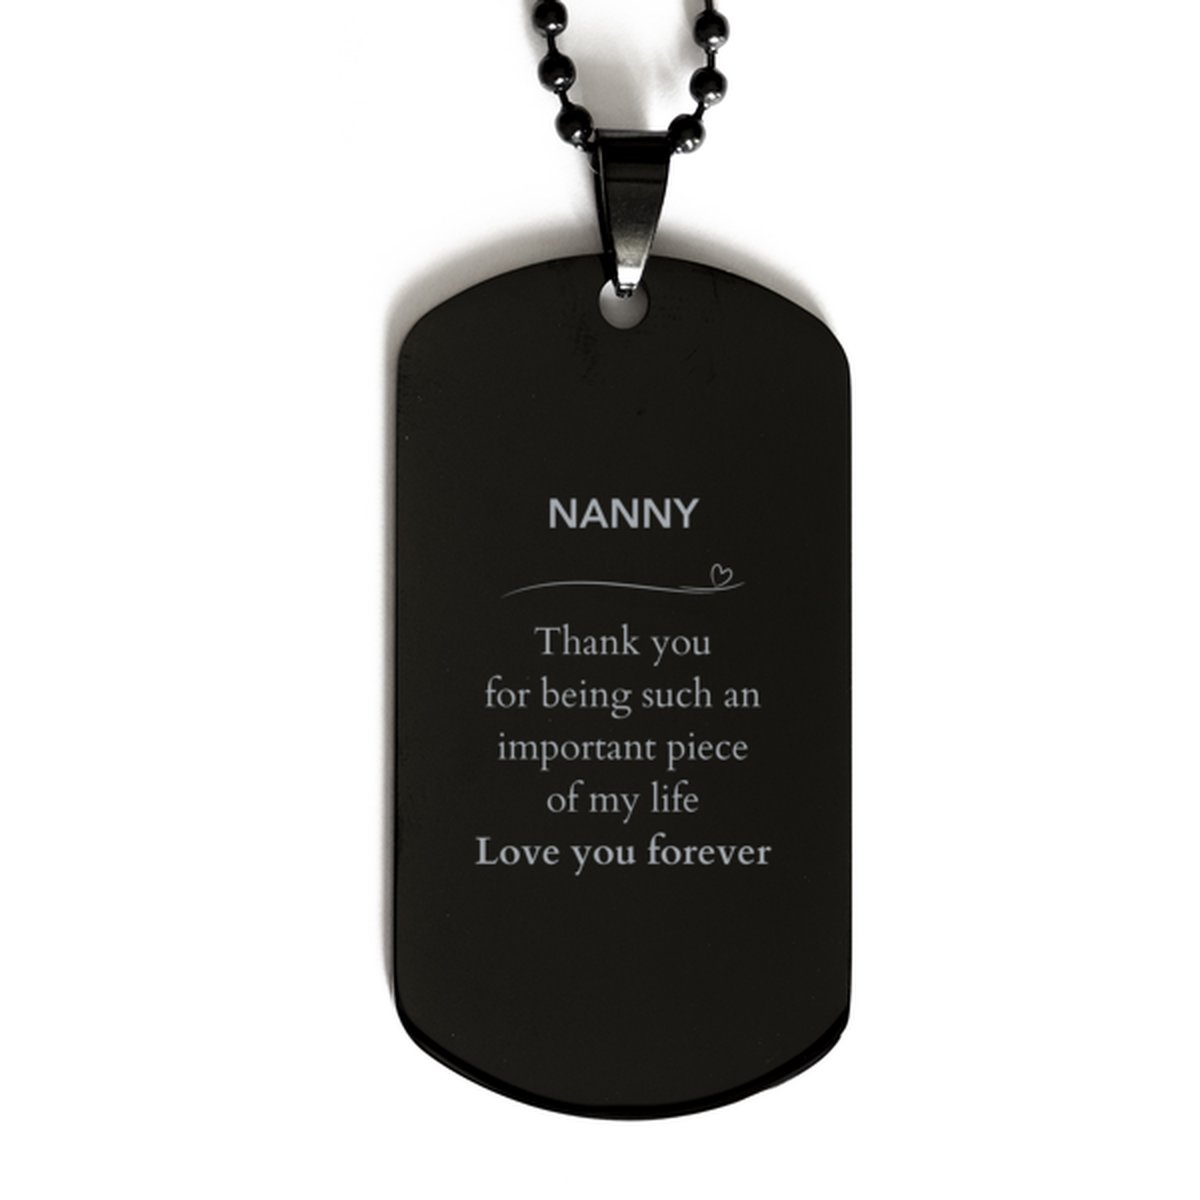 Appropriate Nanny Black Dog Tag Epic Birthday Gifts for Nanny Thank you for being such an important piece of my life Nanny Christmas Mothers Fathers Day